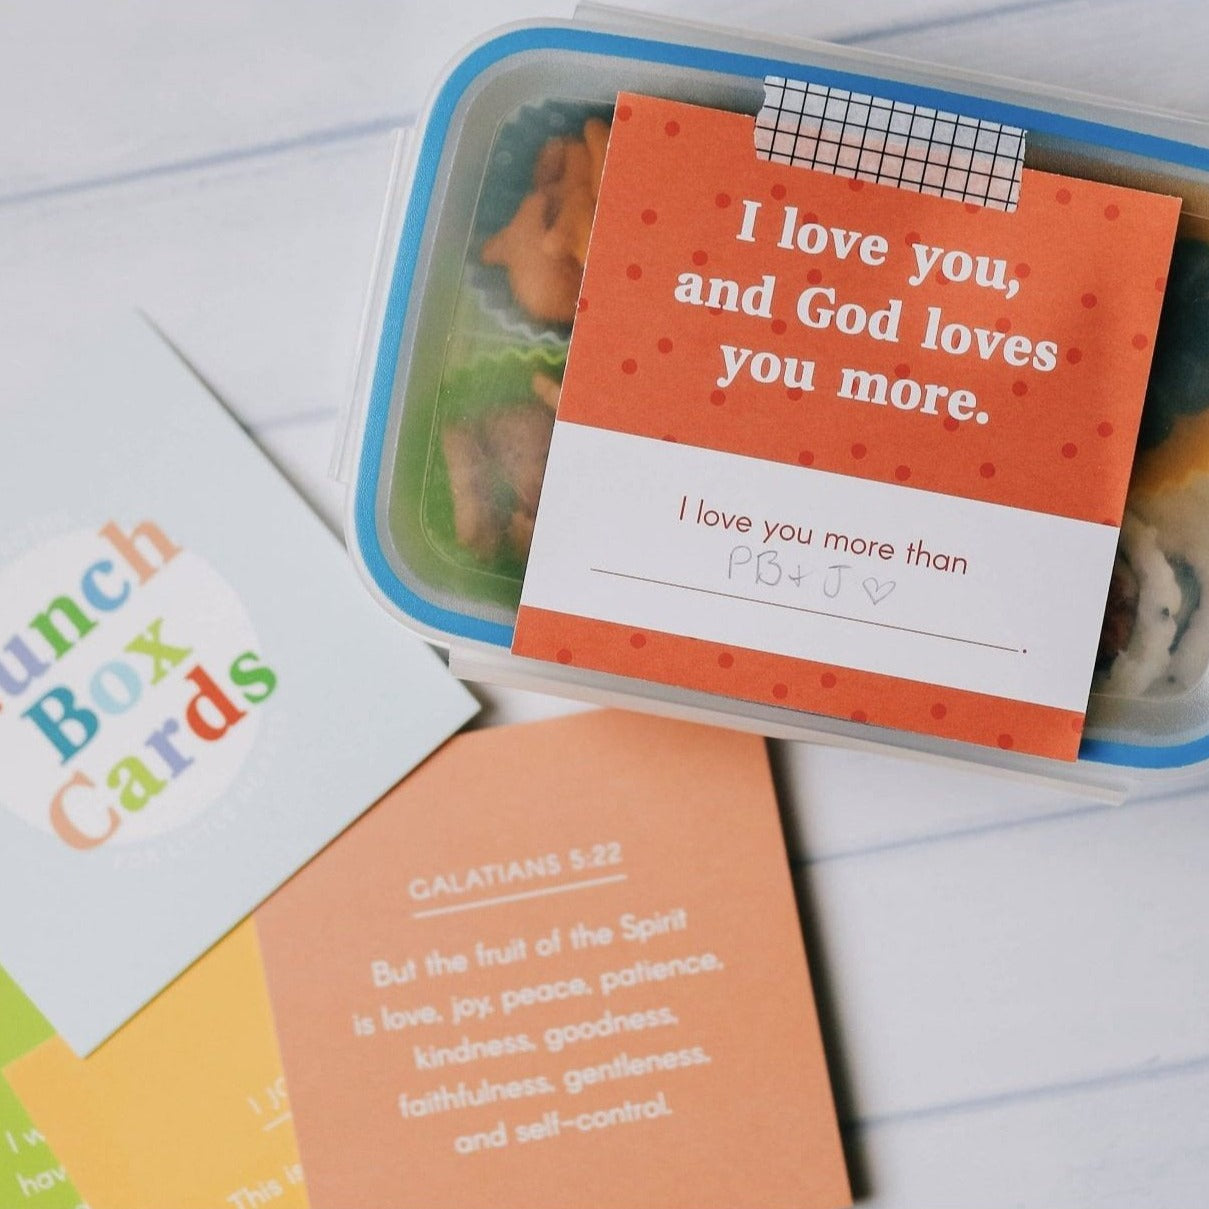 The Daily Grace Co. | Lunch Box Card Set